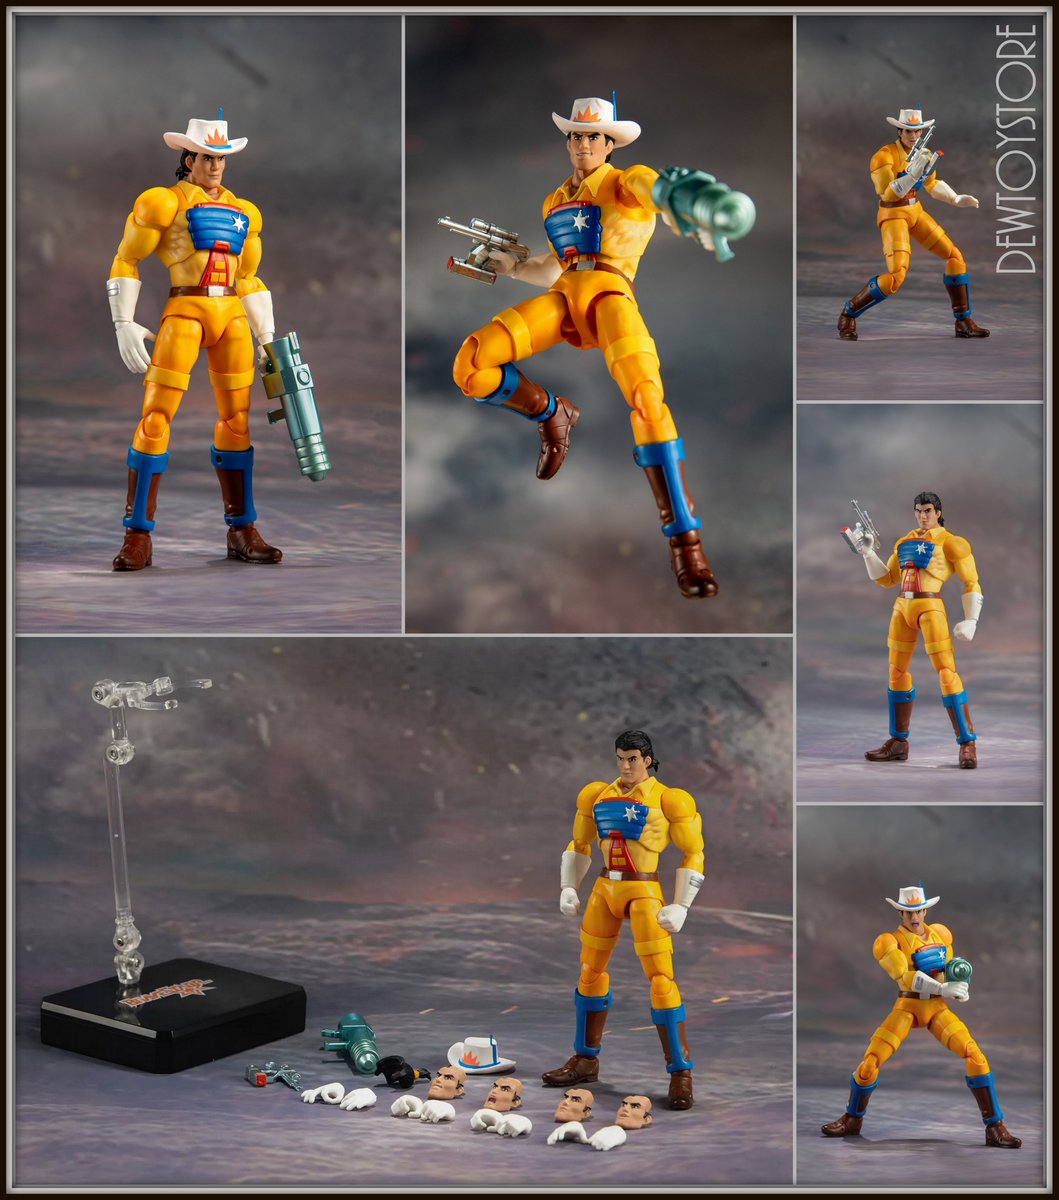 ⭐[𝗣𝗿𝗲-𝗼𝗿𝗱𝗲𝗿] GT Toys 1/12 Scale Action Figure - BraveStarr ⭐
ohmyprimus.com/gtsbvstar.html

#ohmyprimus #dewtoystore #actionfigurephotography #onetwelfth #onetwelfthscale #onetwelfthfigure #onetwelve #onetwelvescale #actionfigure #actionfigures #gttoys #bravestarr